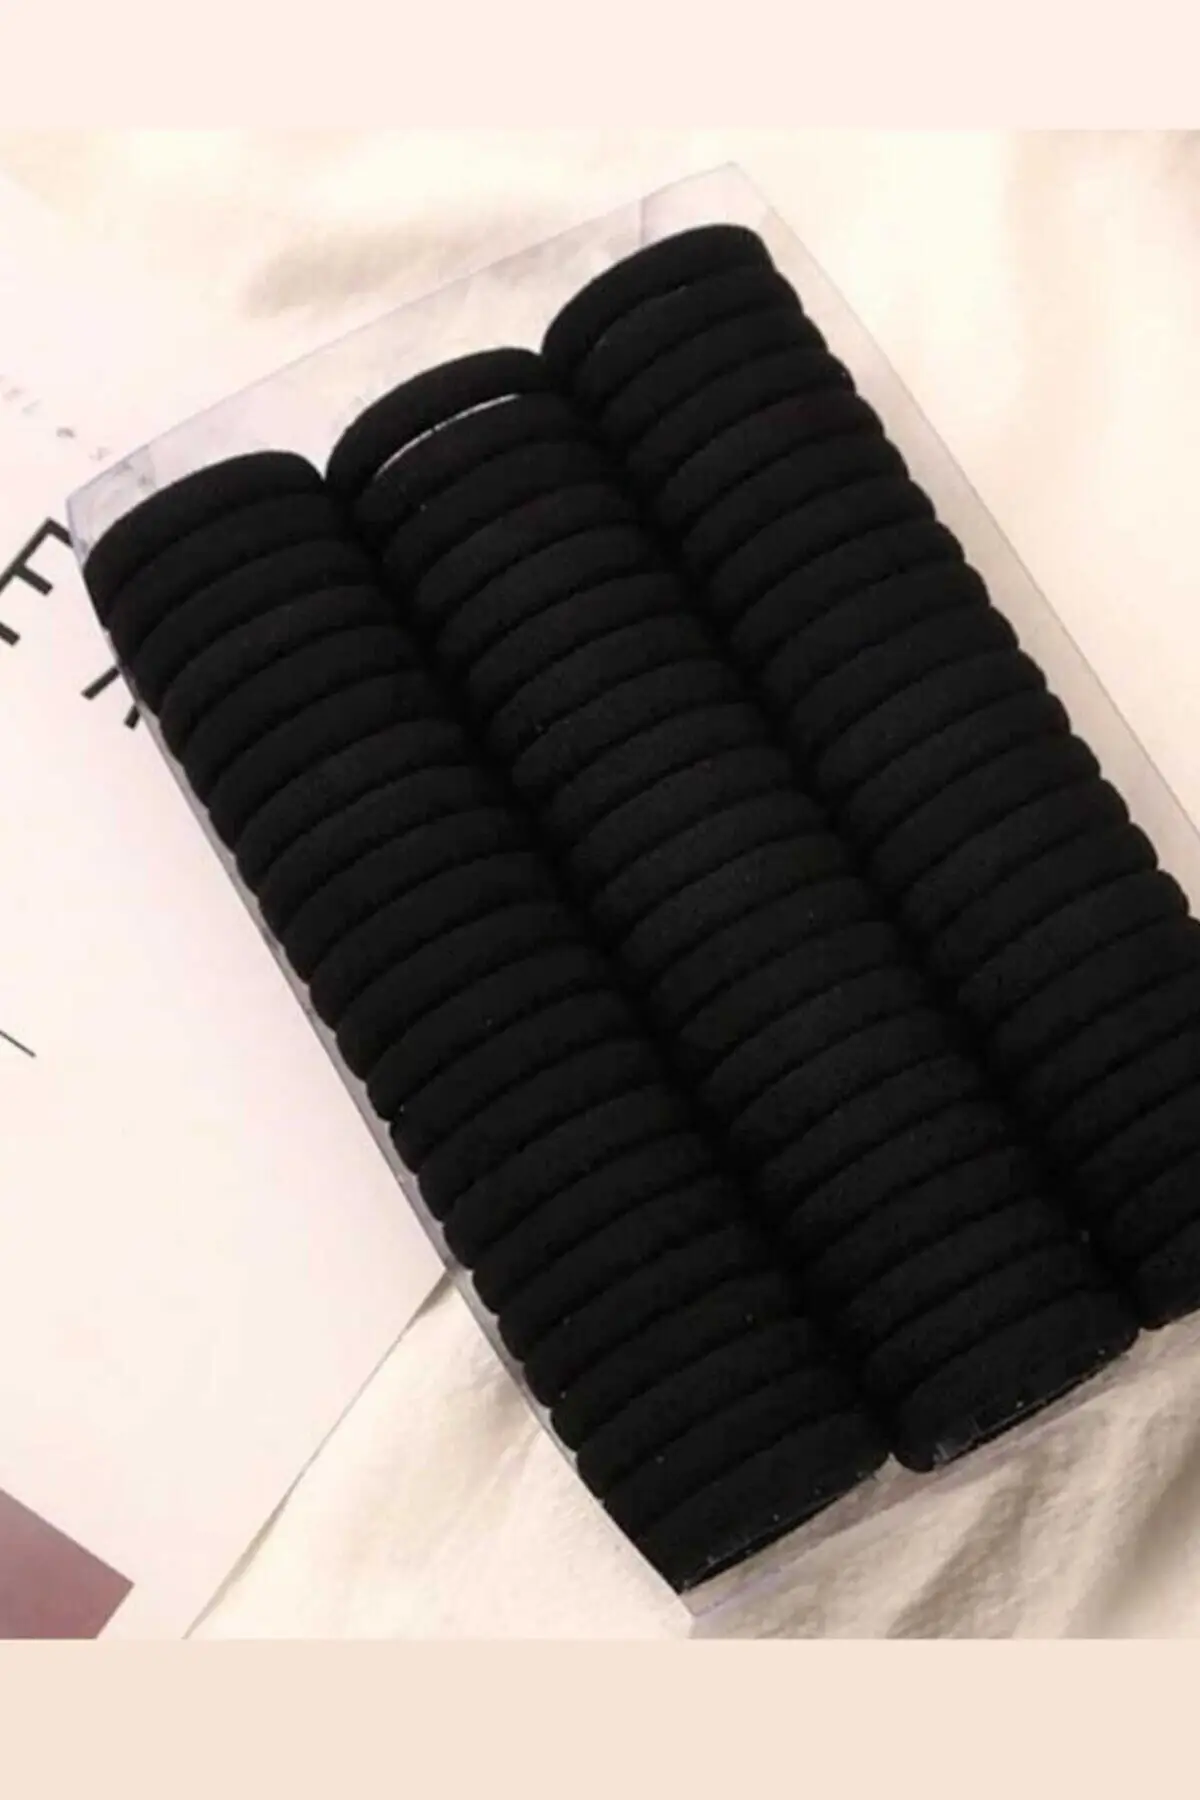 100 Pieces Boxed Rubber Black Buckle Set Fast Delivery